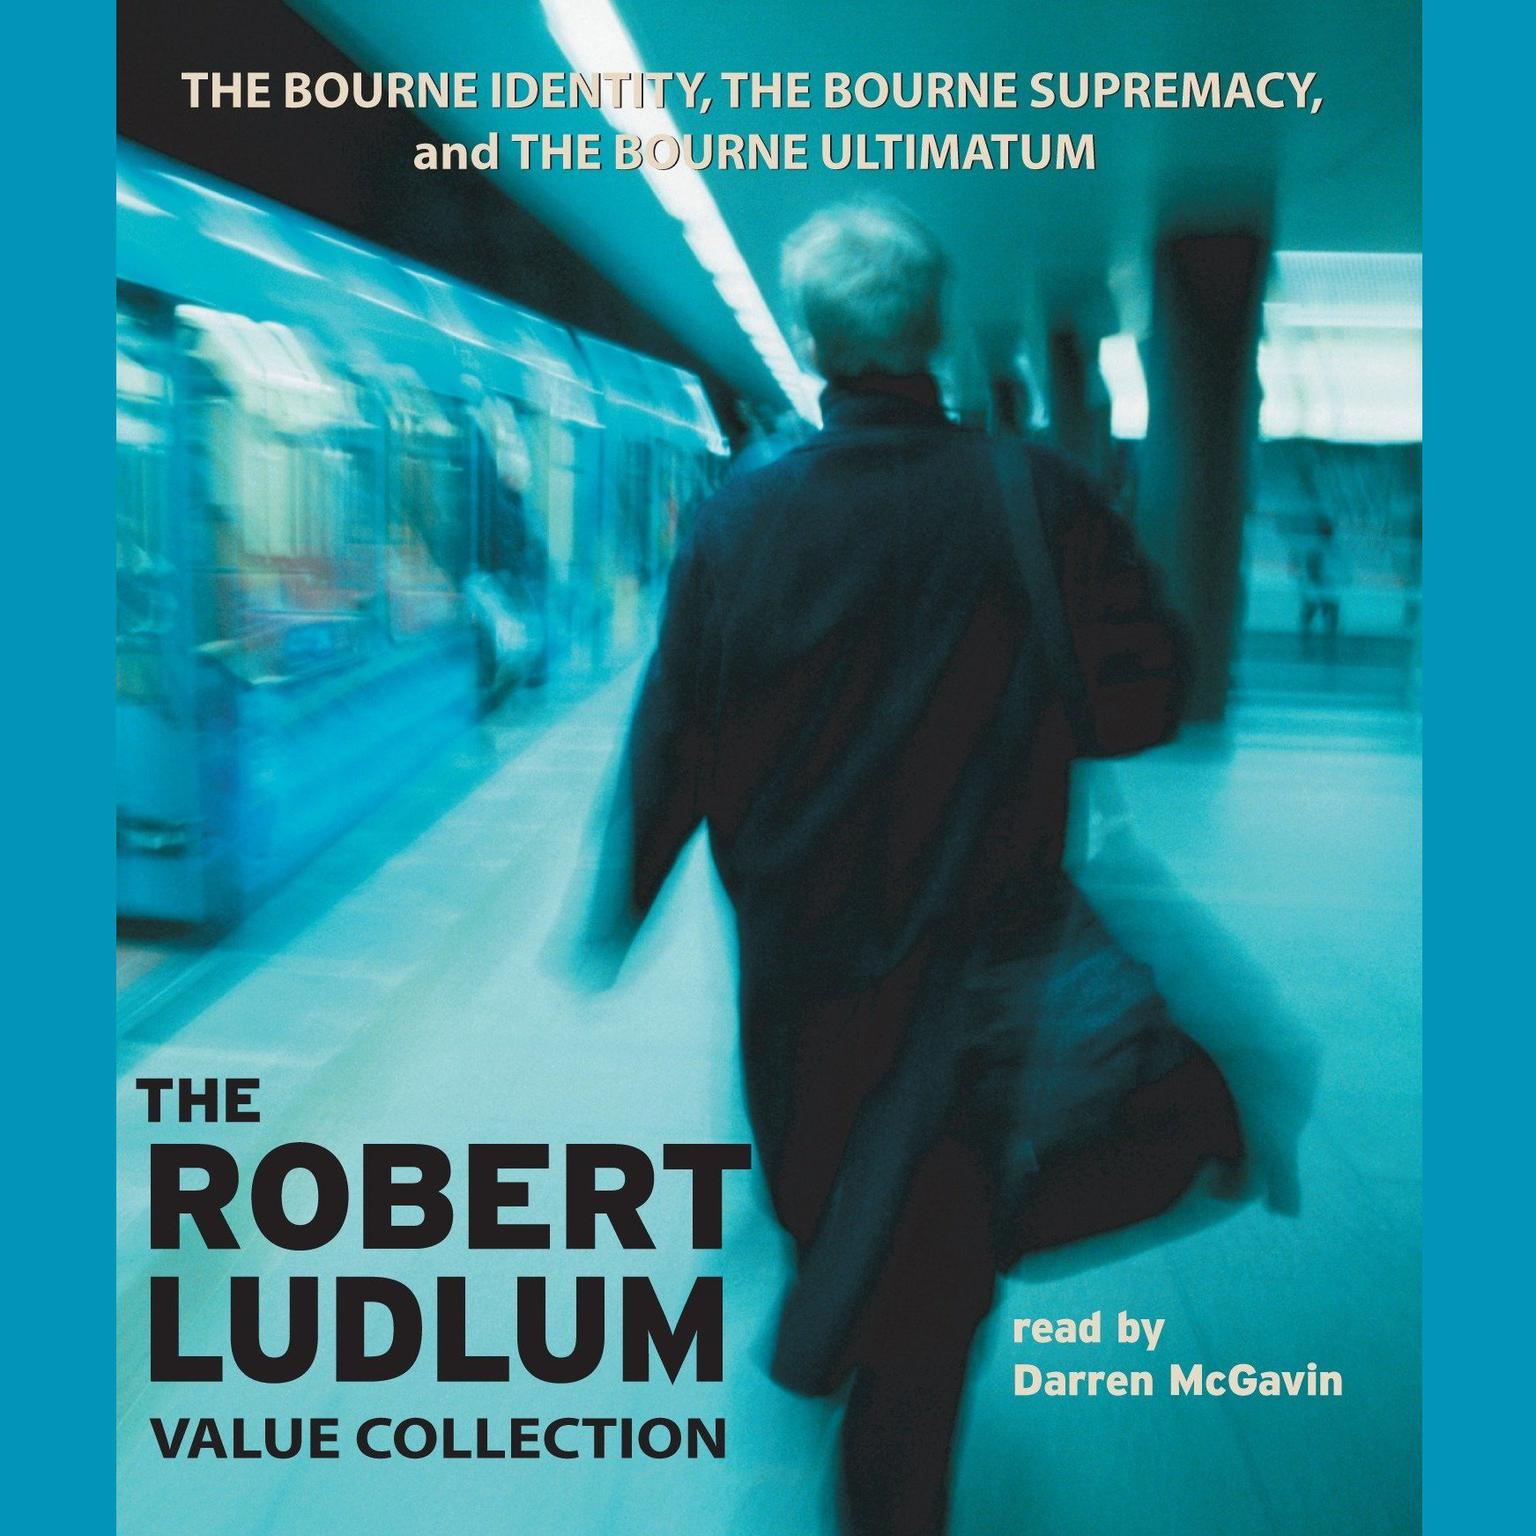 The Robert Ludlum Value Collection (Abridged): The Bourne Identity, The Bourne Supremacy, The Bourne Ultimatum Audiobook, by Robert Ludlum